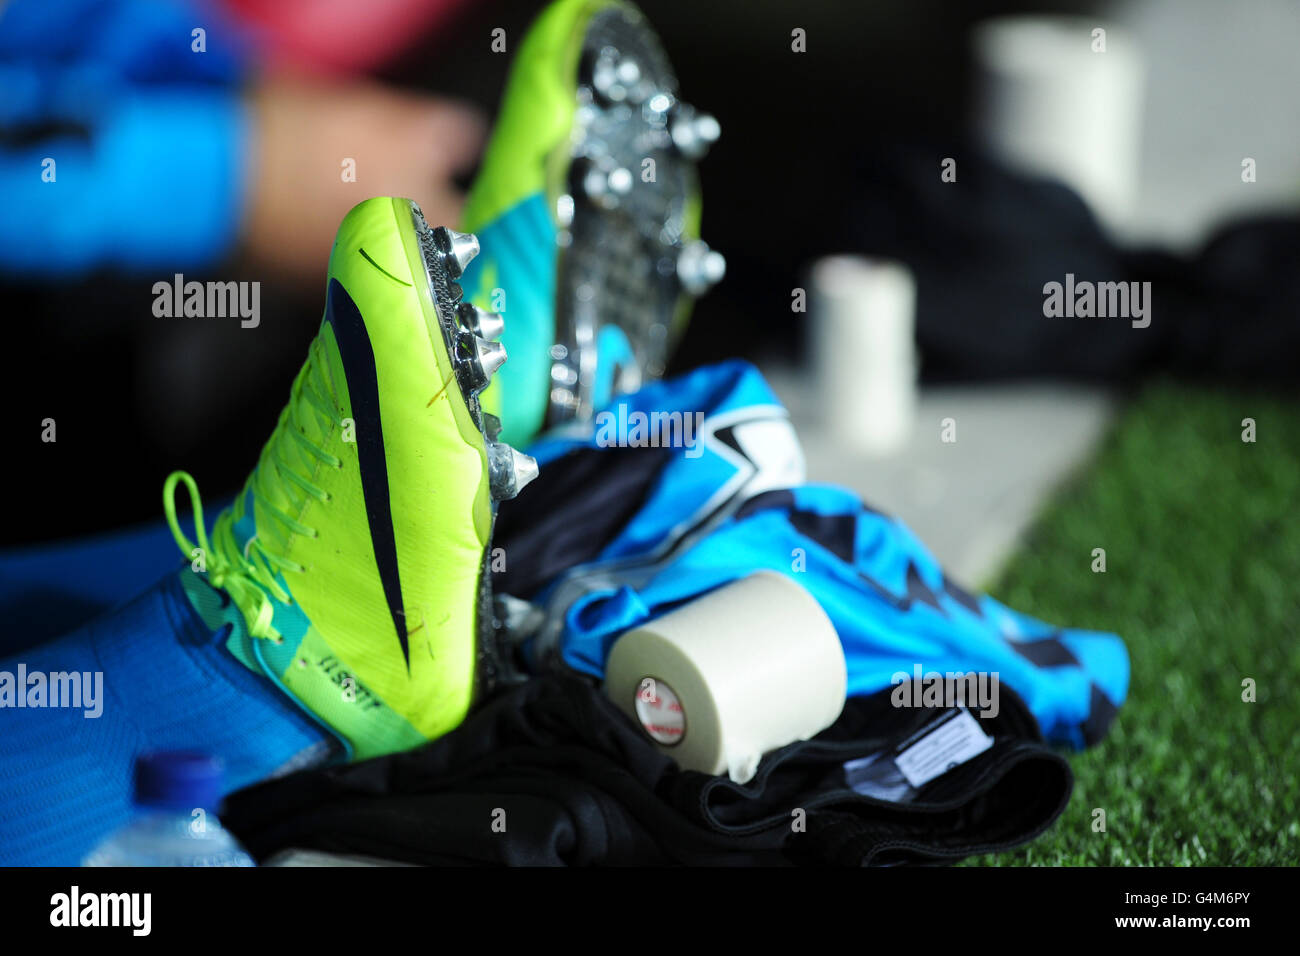 Soccer - UEFA Europa League - Group C - PSV Eindhoven v Hapoel Tel-Aviv - Philips Stadion. Detailed view of a pair of green Nike football boots worn by a footballer Stock Photo